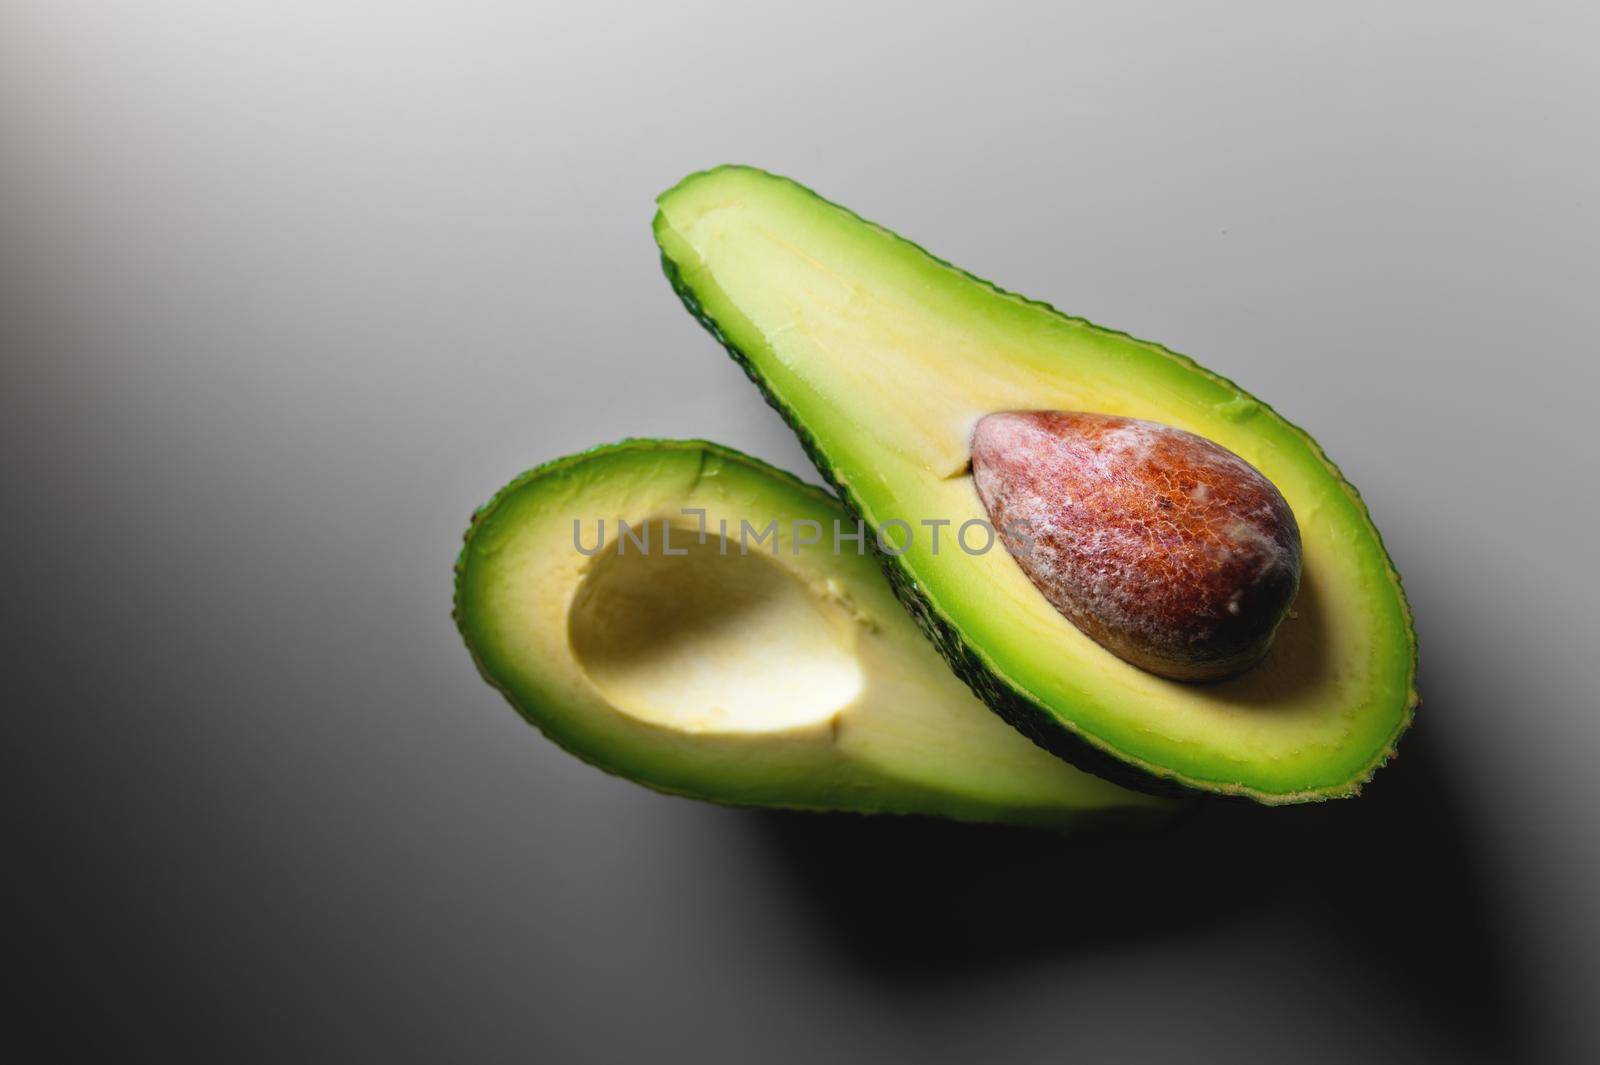 Avocado. Organic avocados on a white table. Healthy vegan food concept. Diet. Dieting.